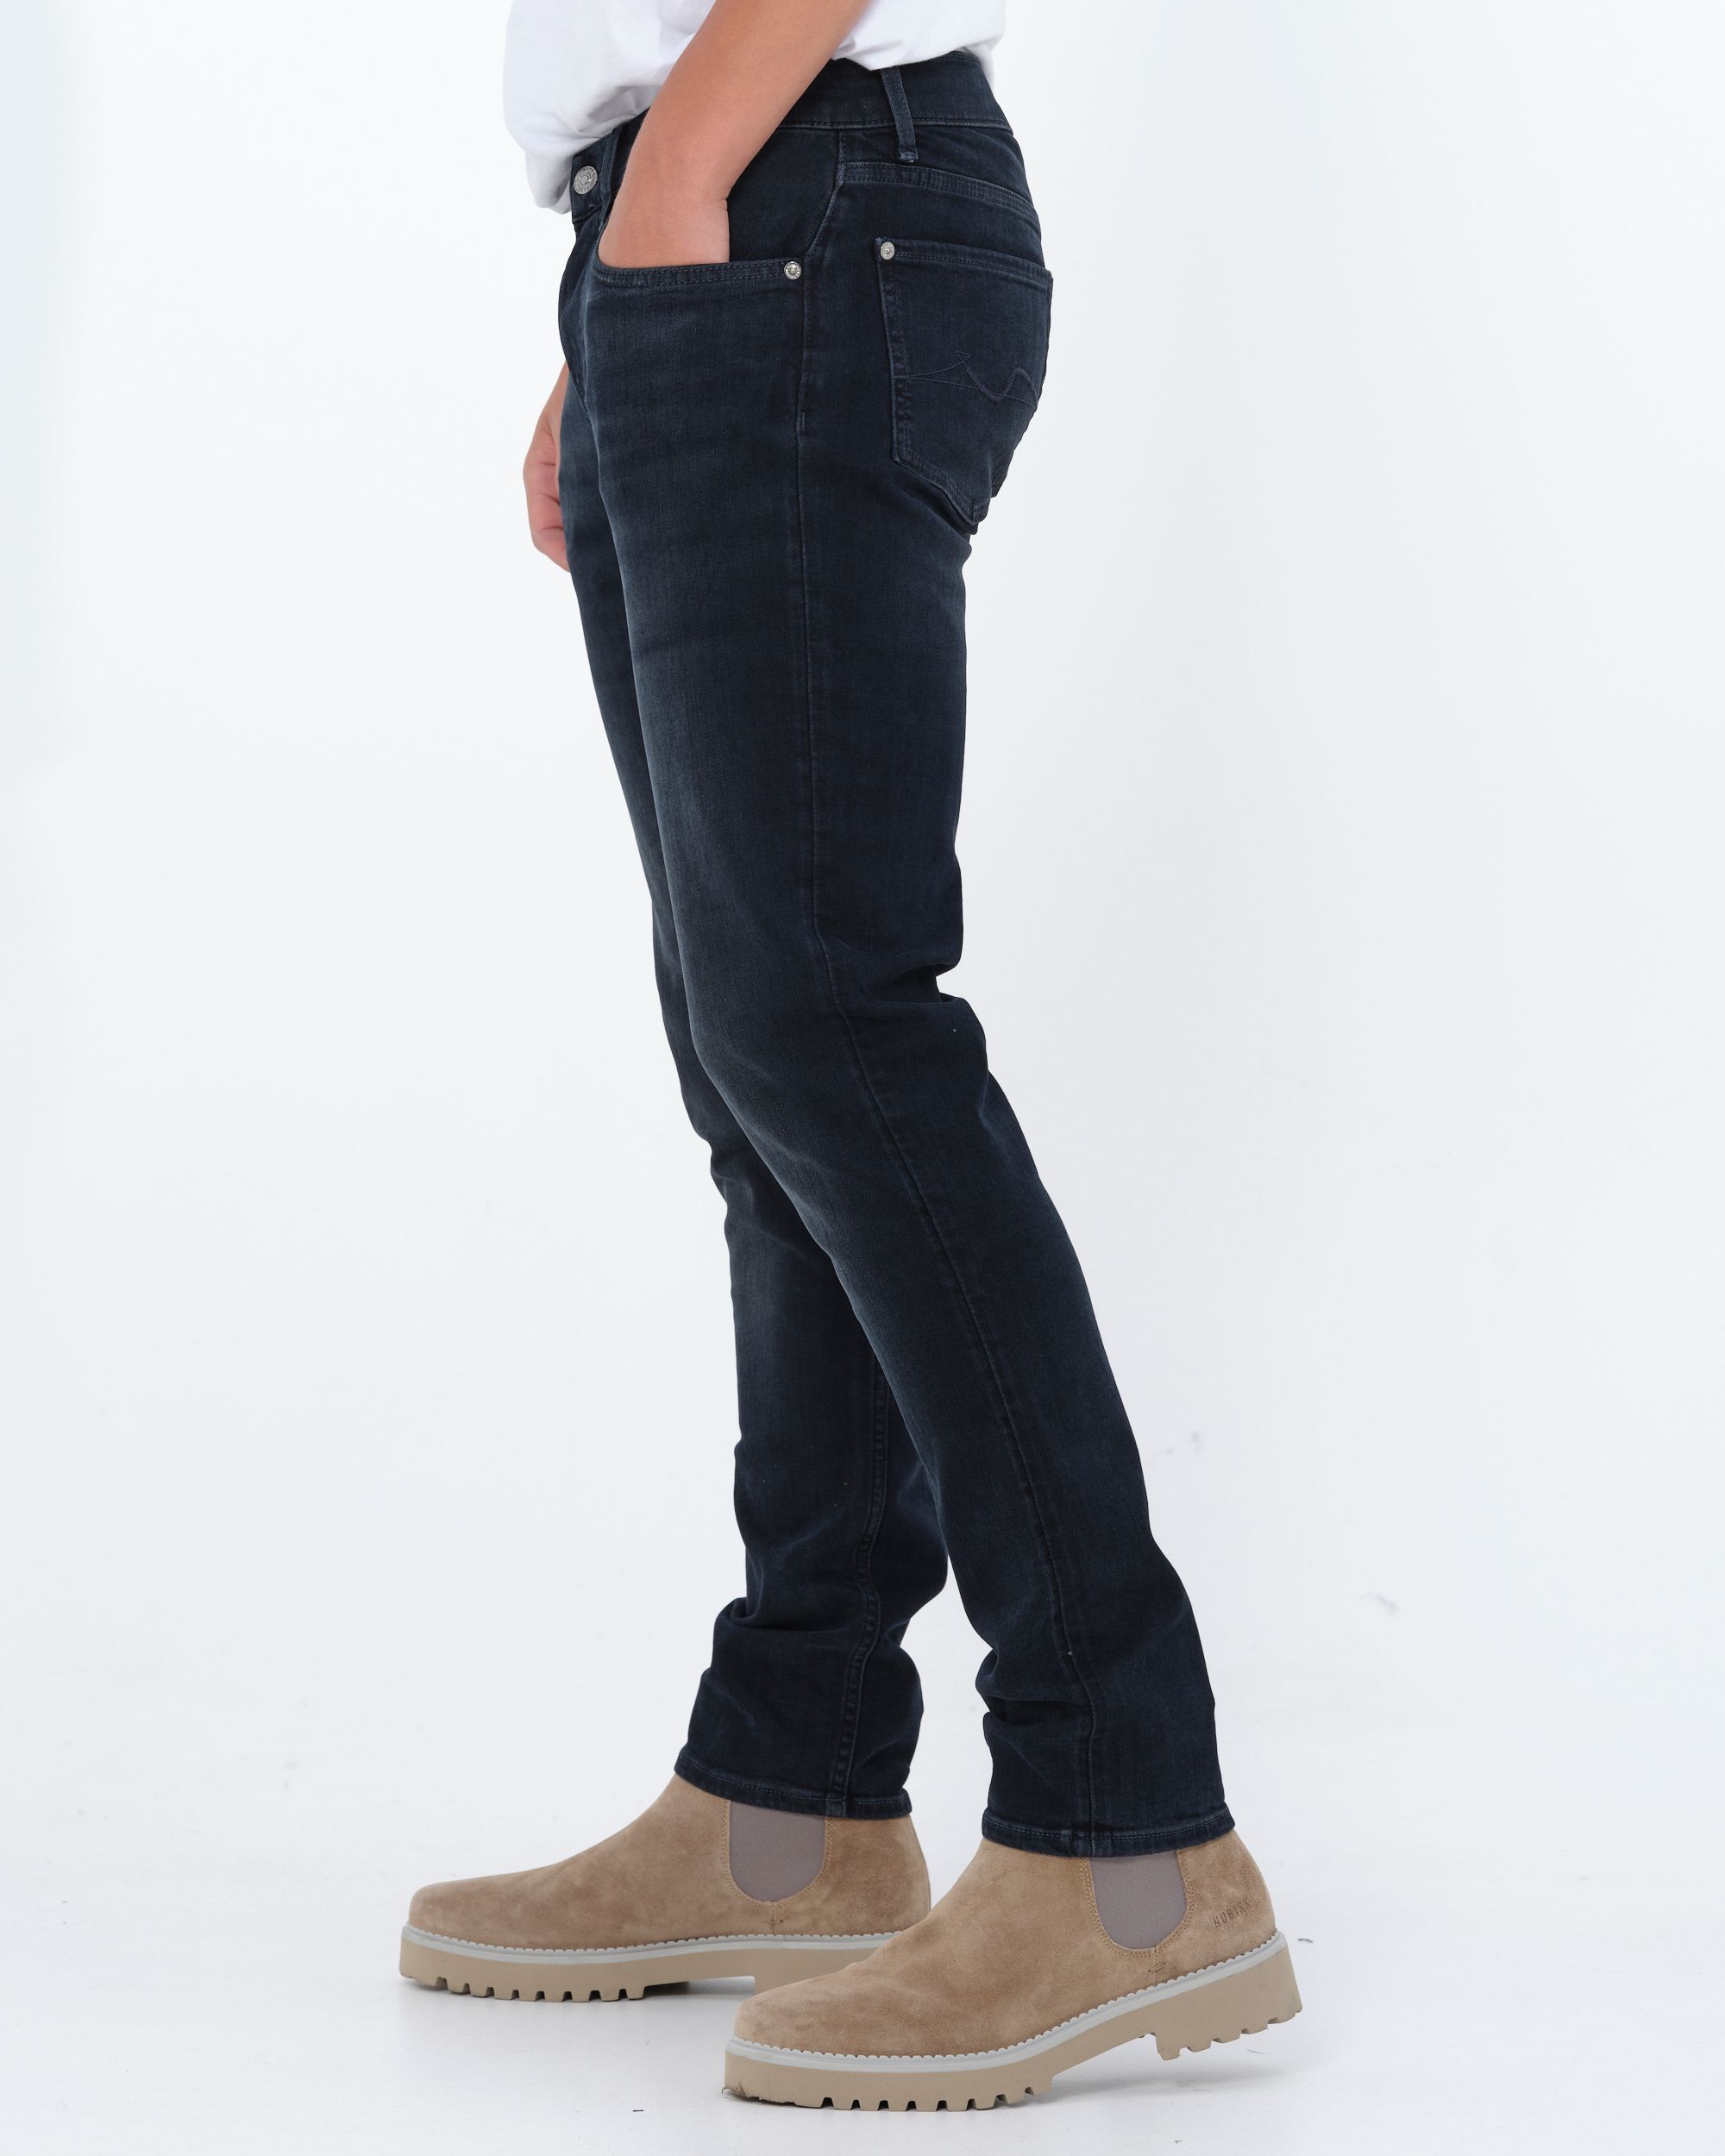 Seven for all mankind Jeans Grijs 081446-001-30